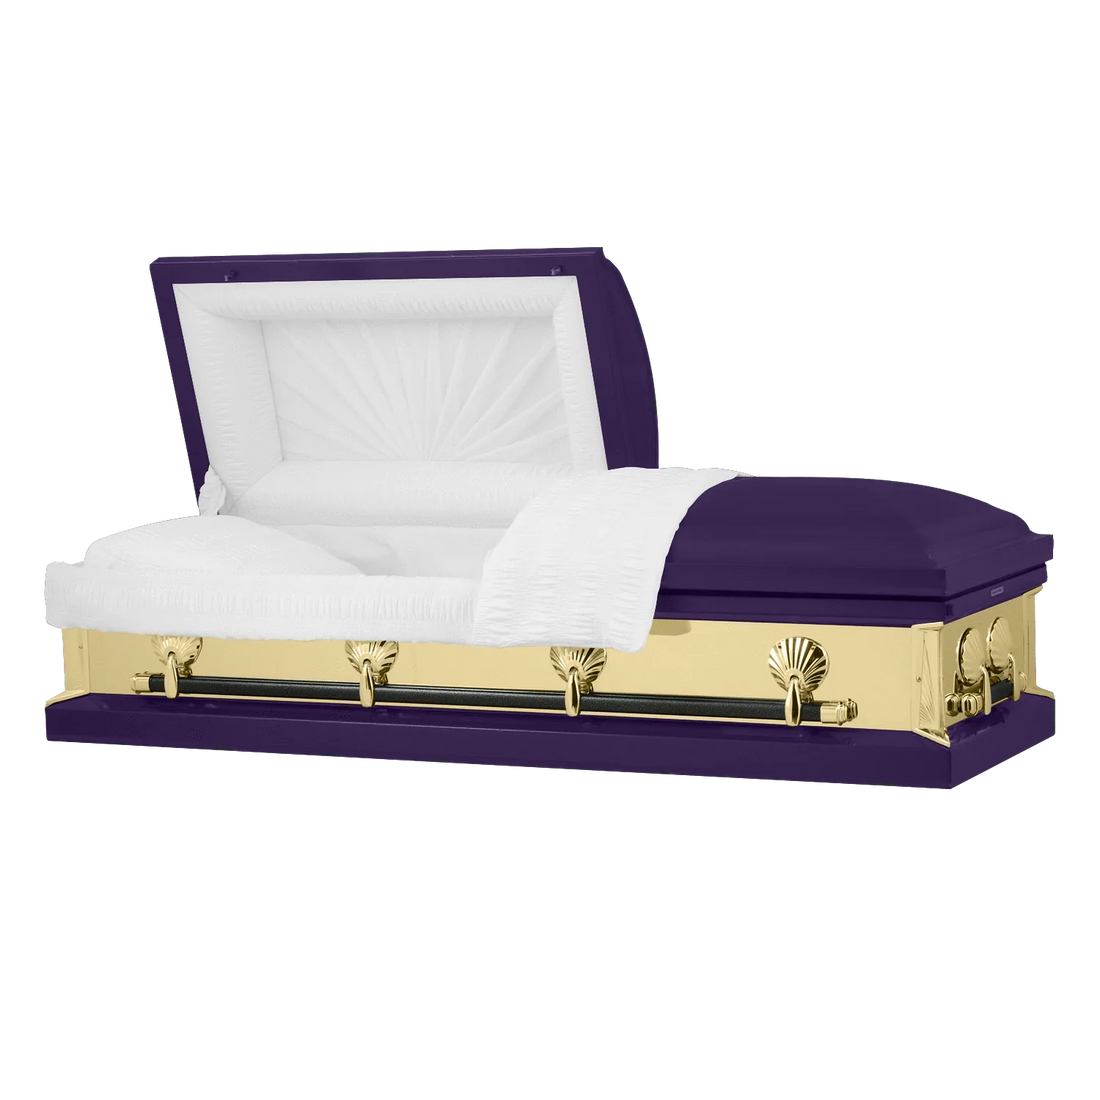 What Is A Half Couch Casket?